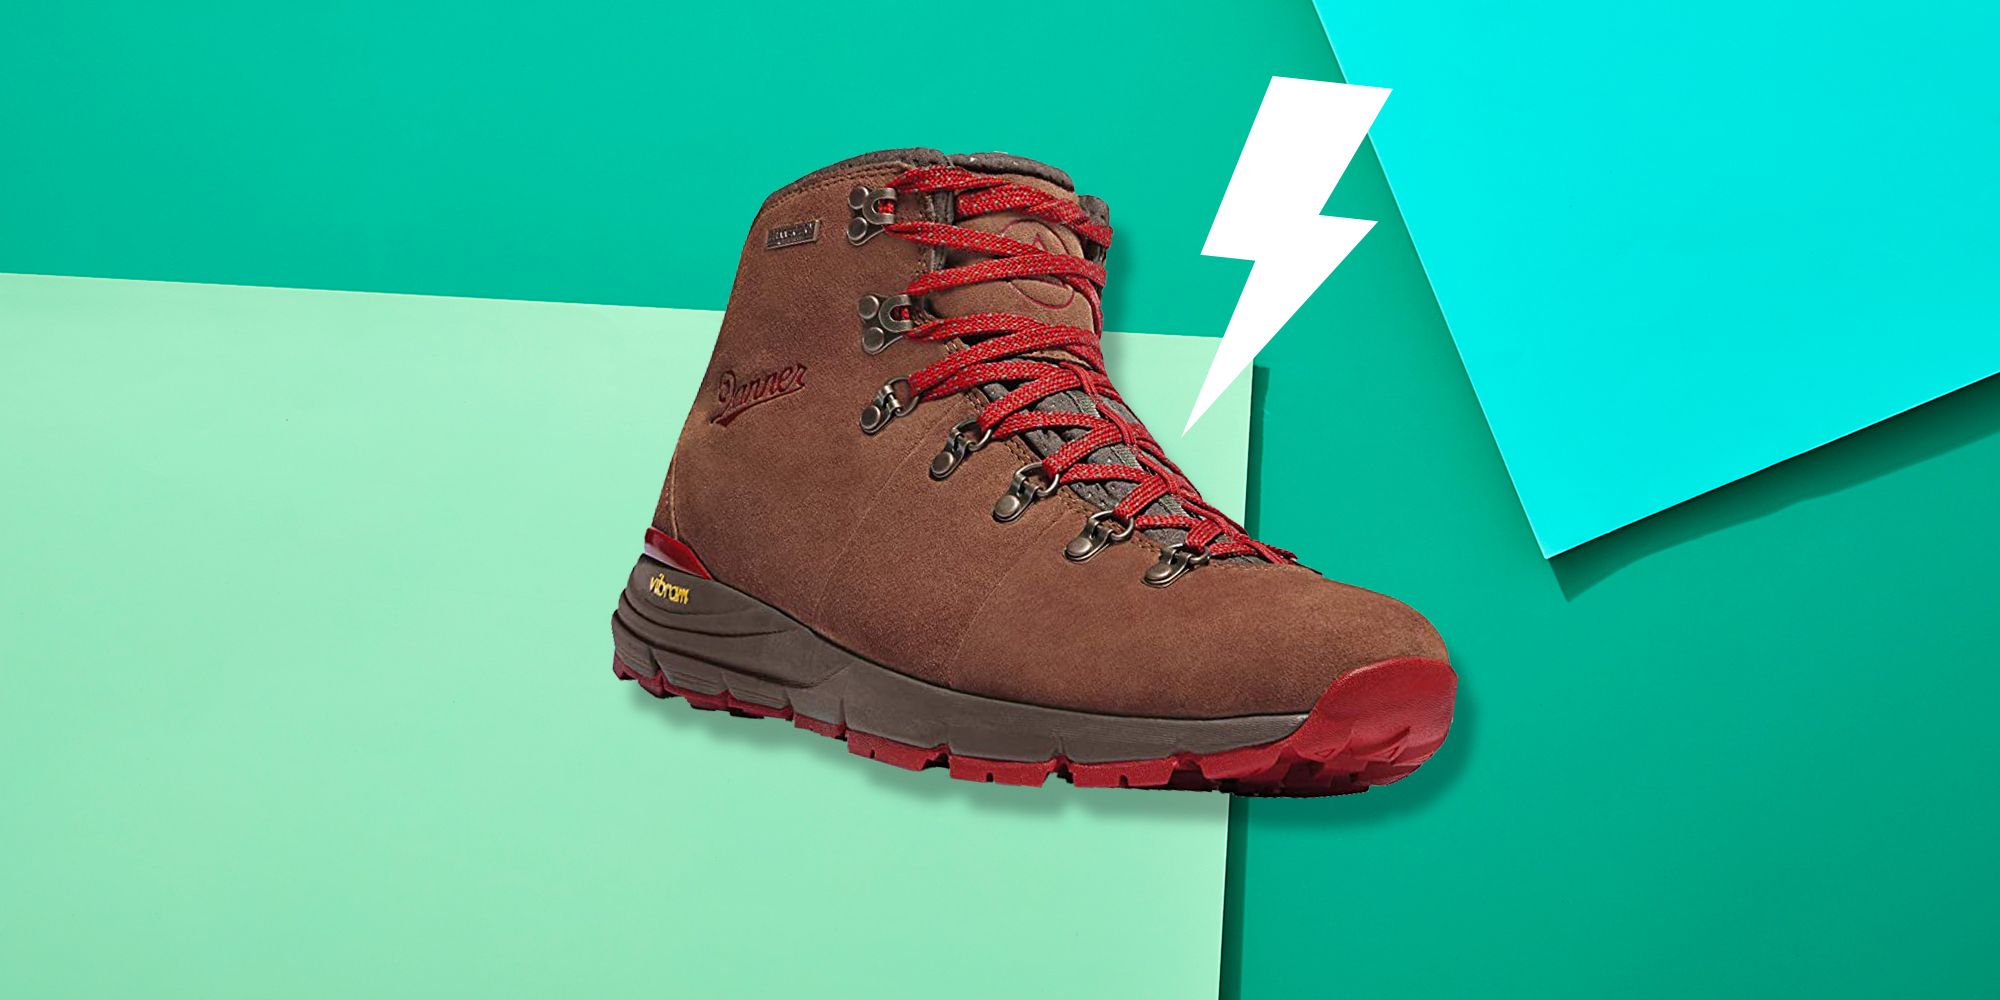 Best Hiking Shoes And Boots For Women 